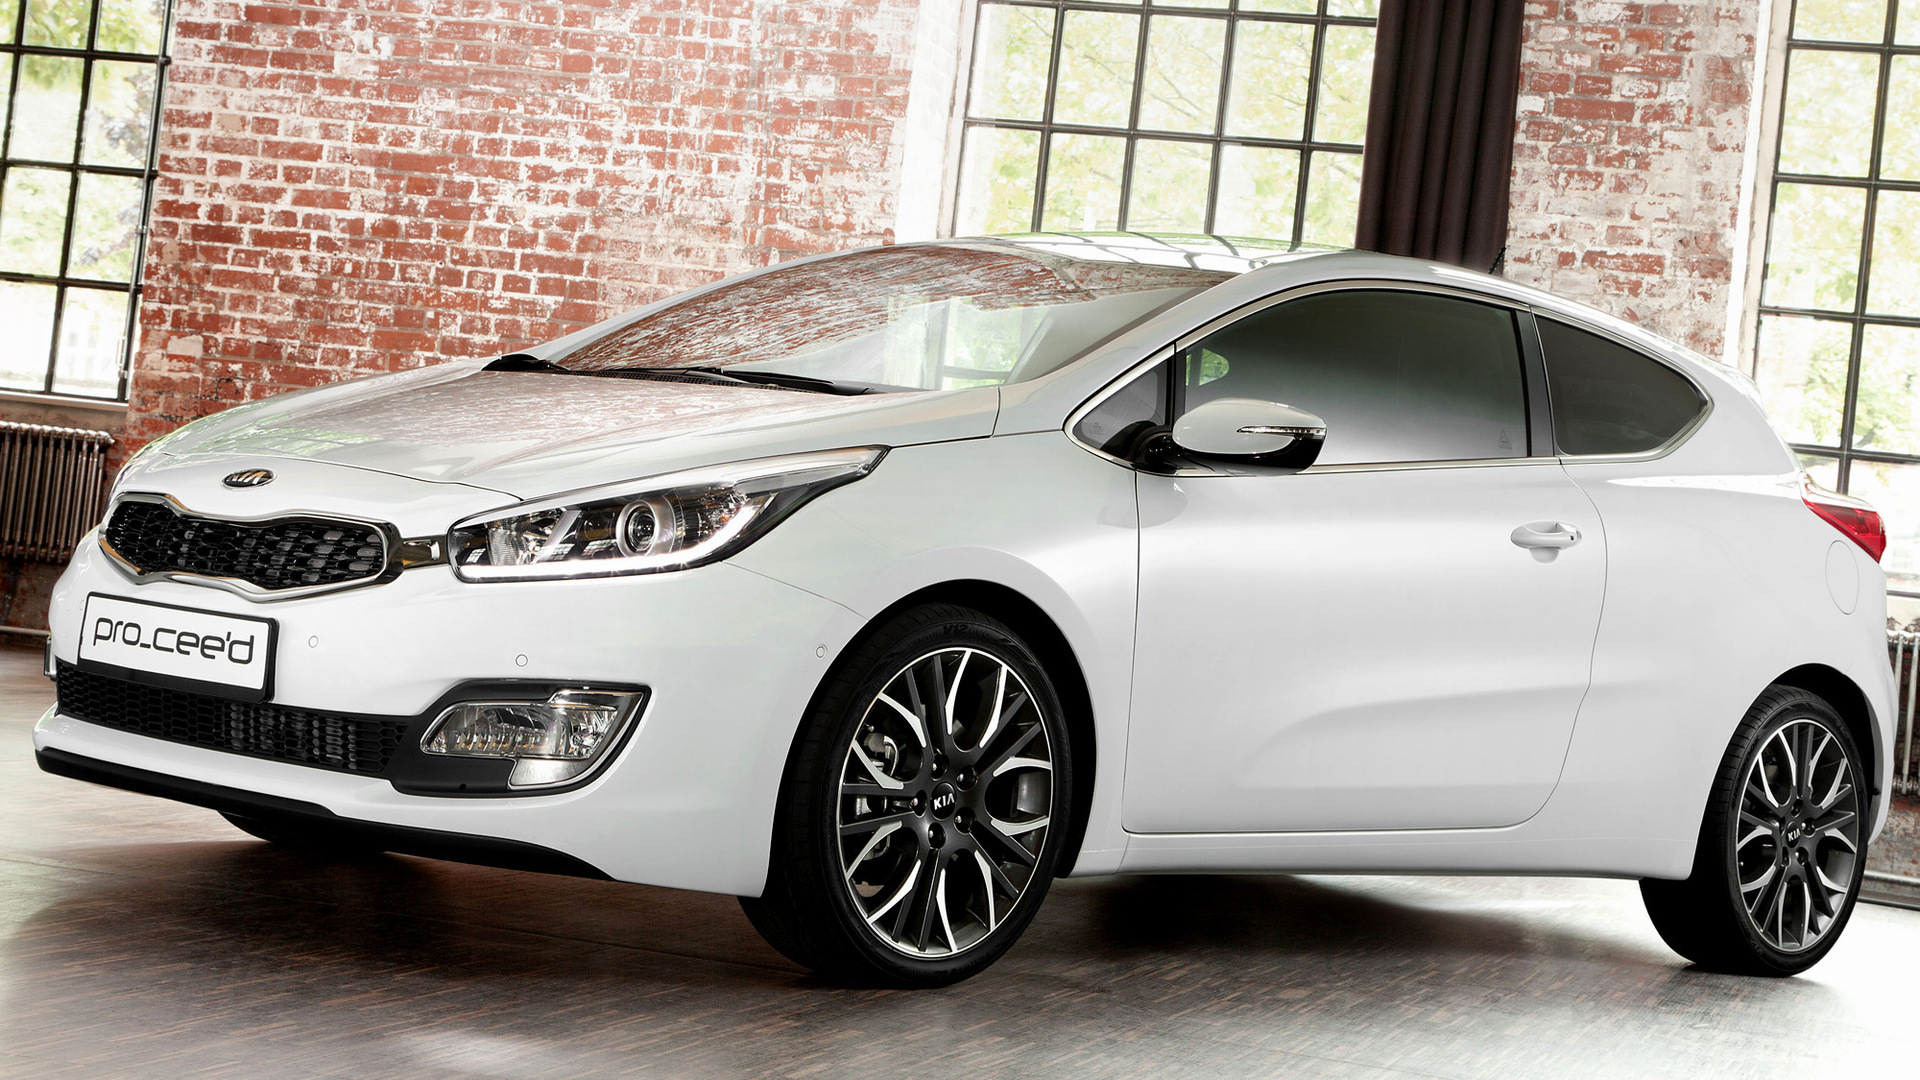 2012 Kia pro_cee'd Wallpapers and HD Images Car Pixel